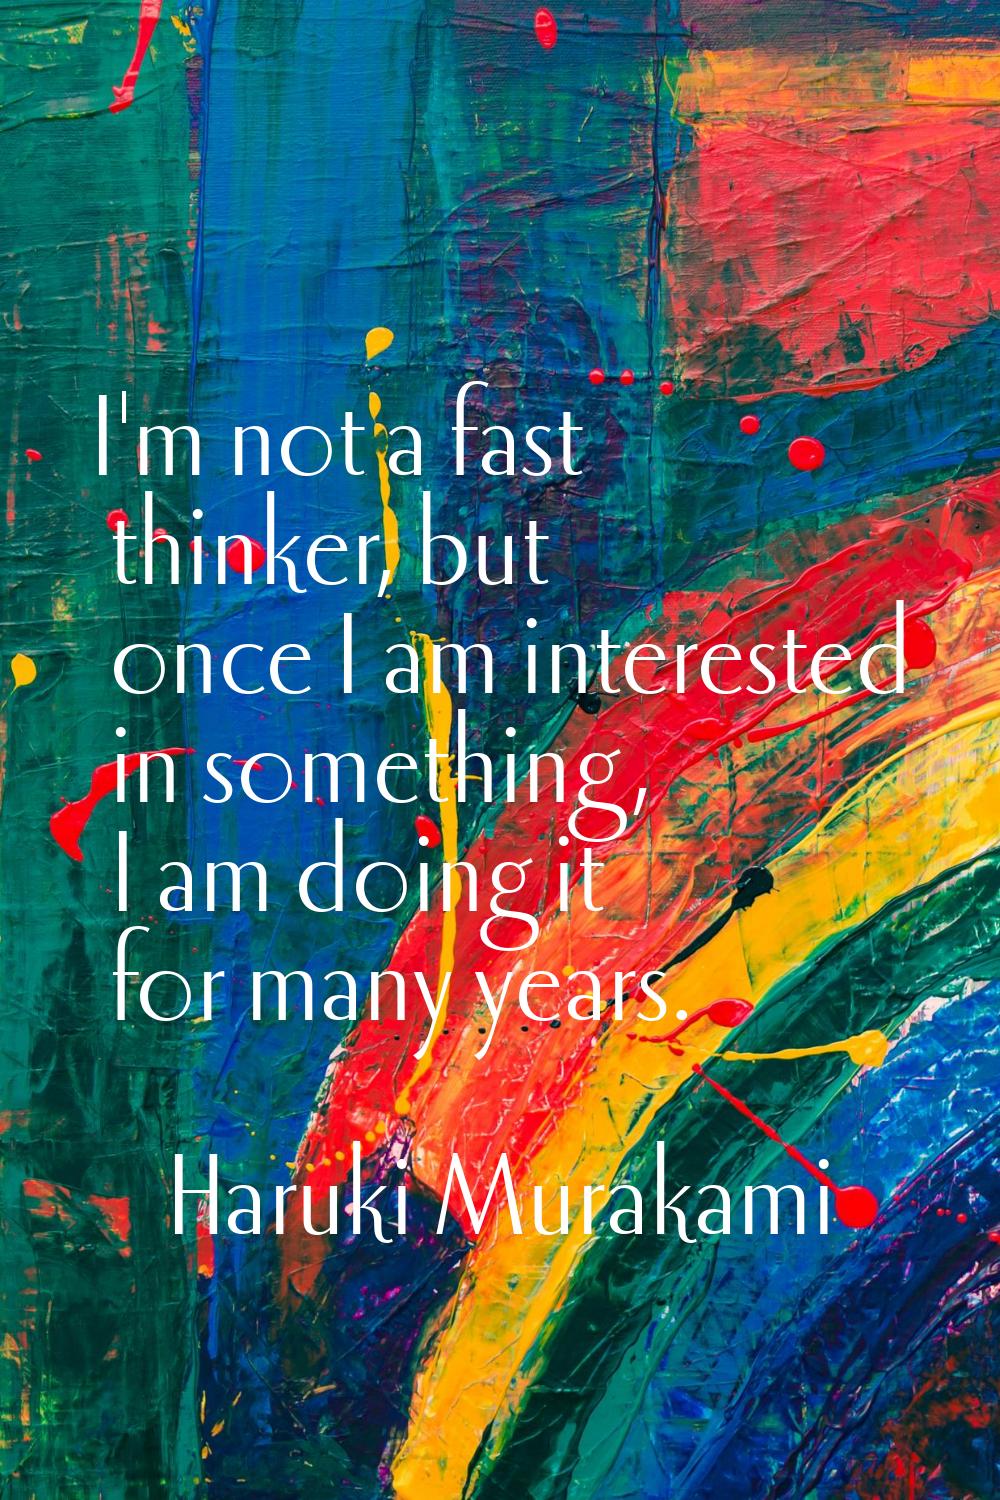 I'm not a fast thinker, but once I am interested in something, I am doing it for many years.